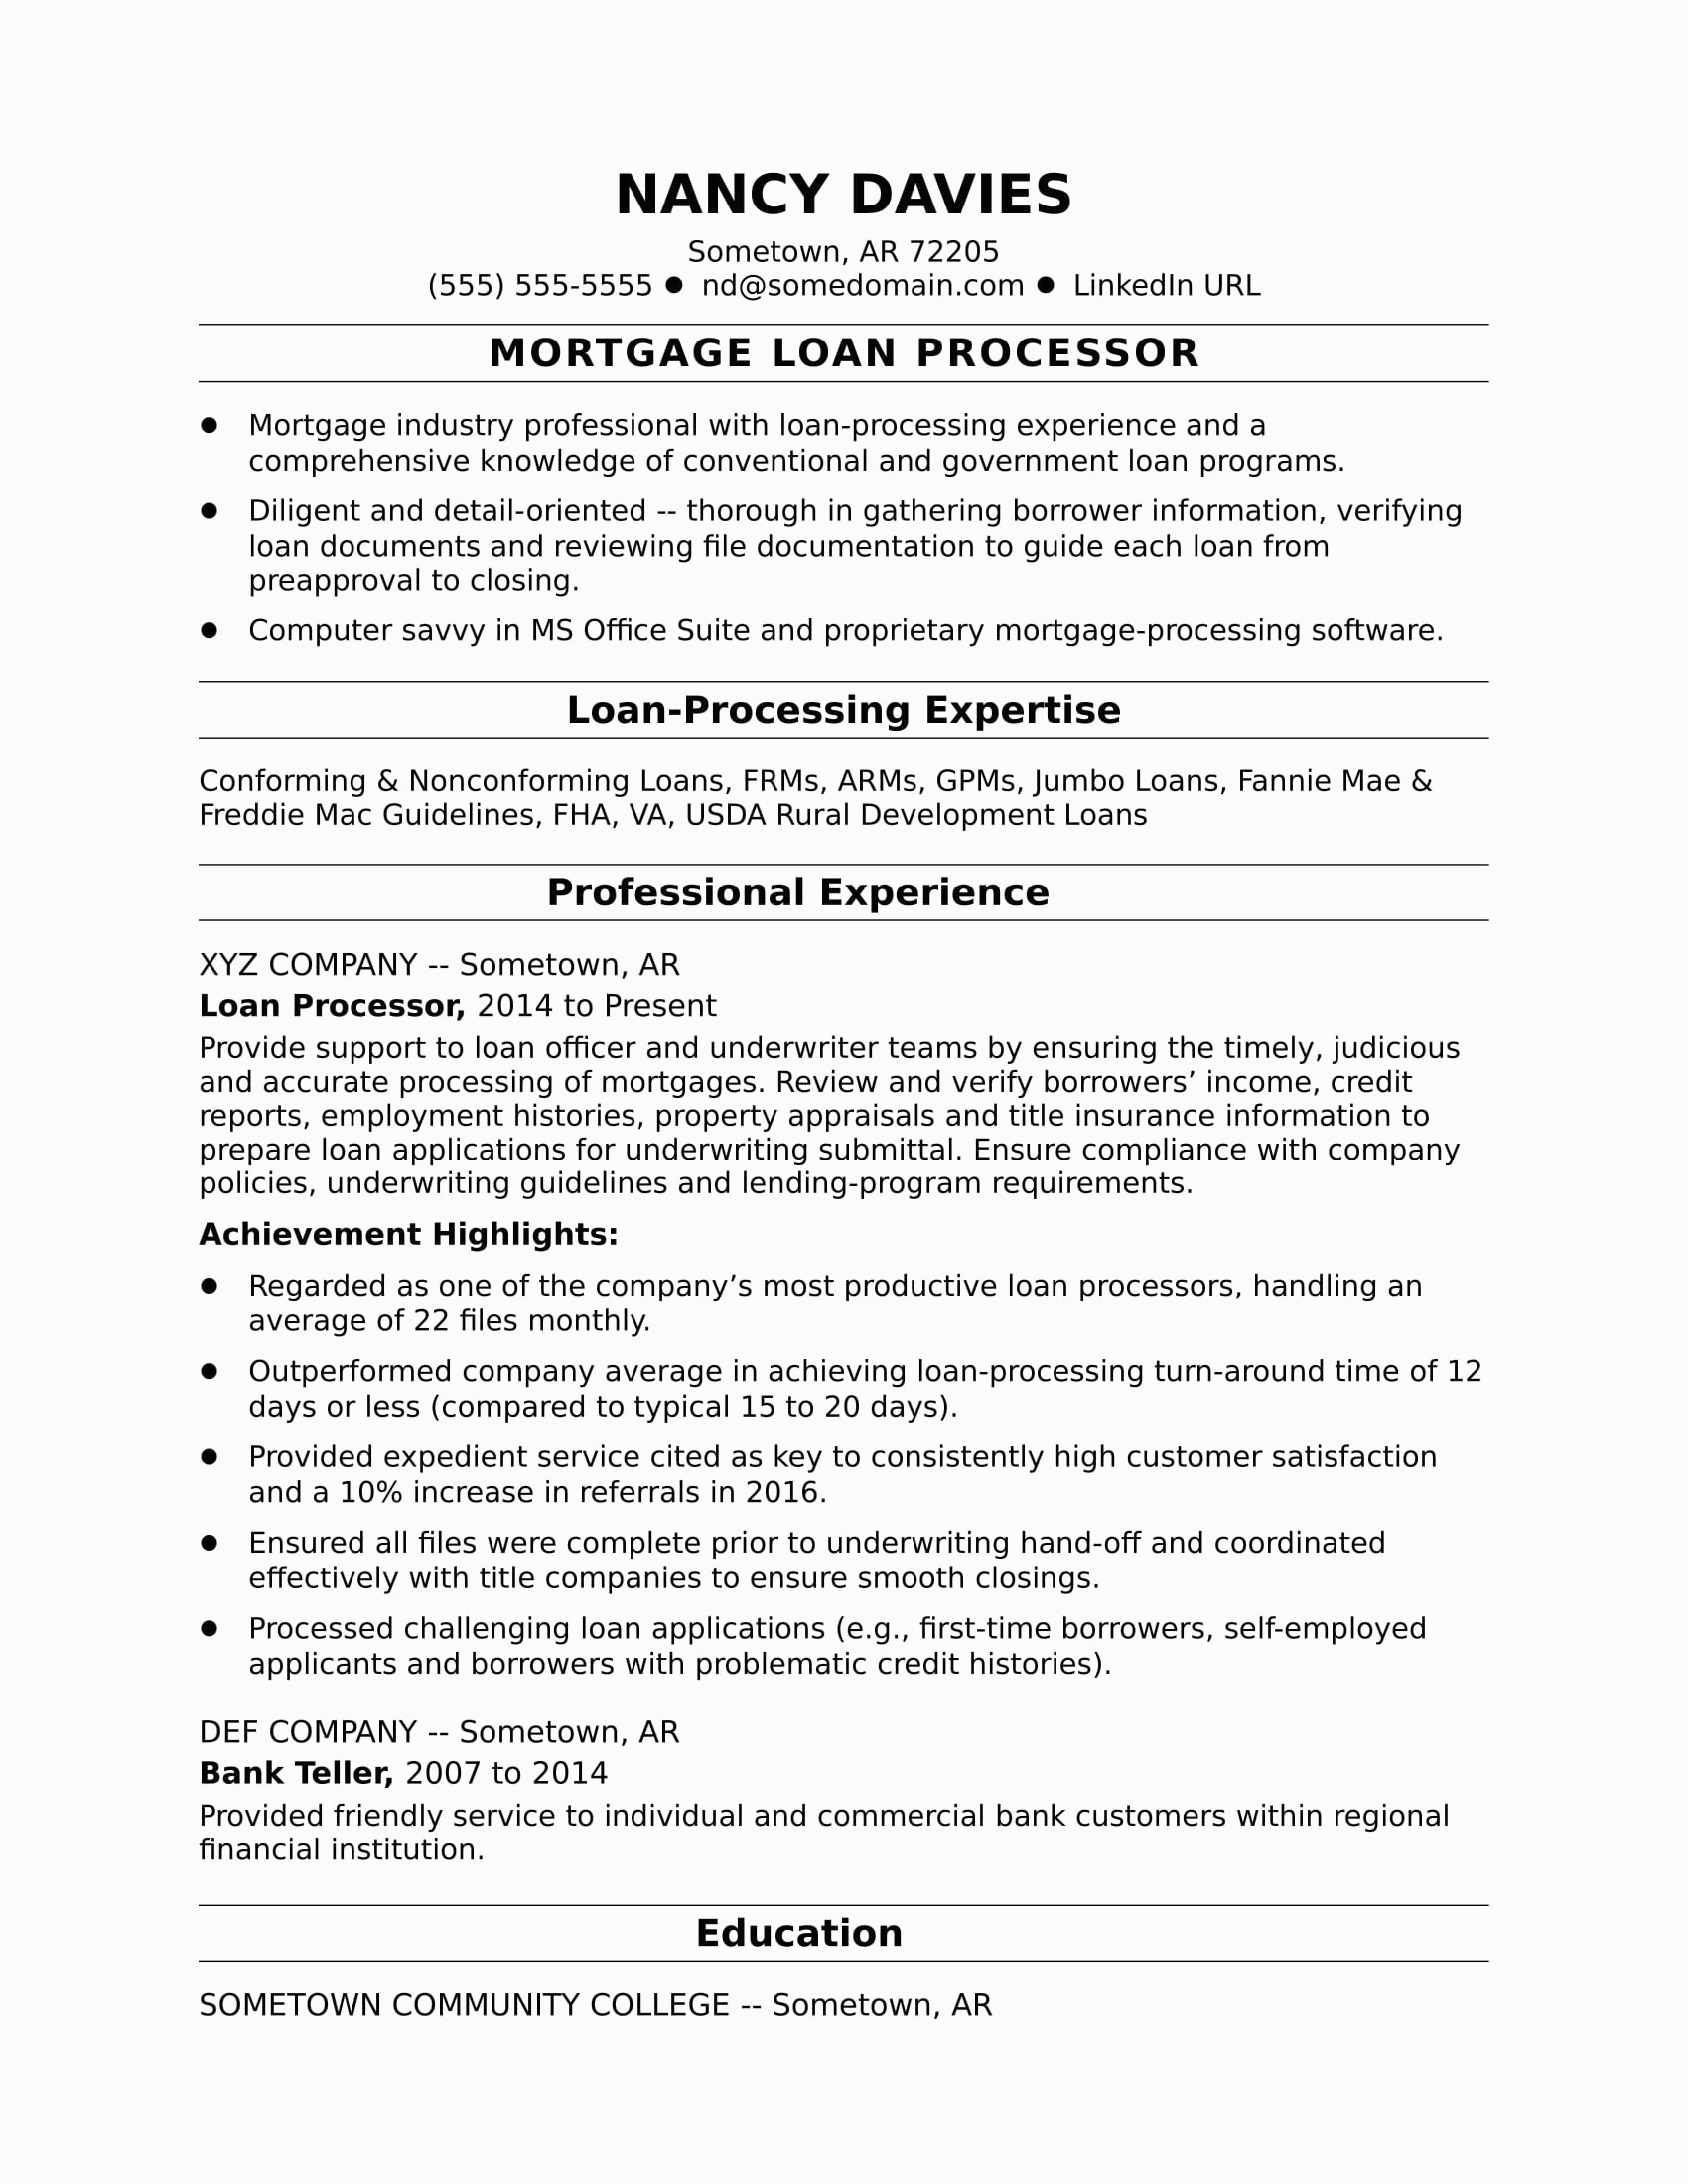 Sample Resume for A Mortgage Loan Officer 😎 Mortgage Loan Officer Resume Mortgage Loan Ficer Job Description